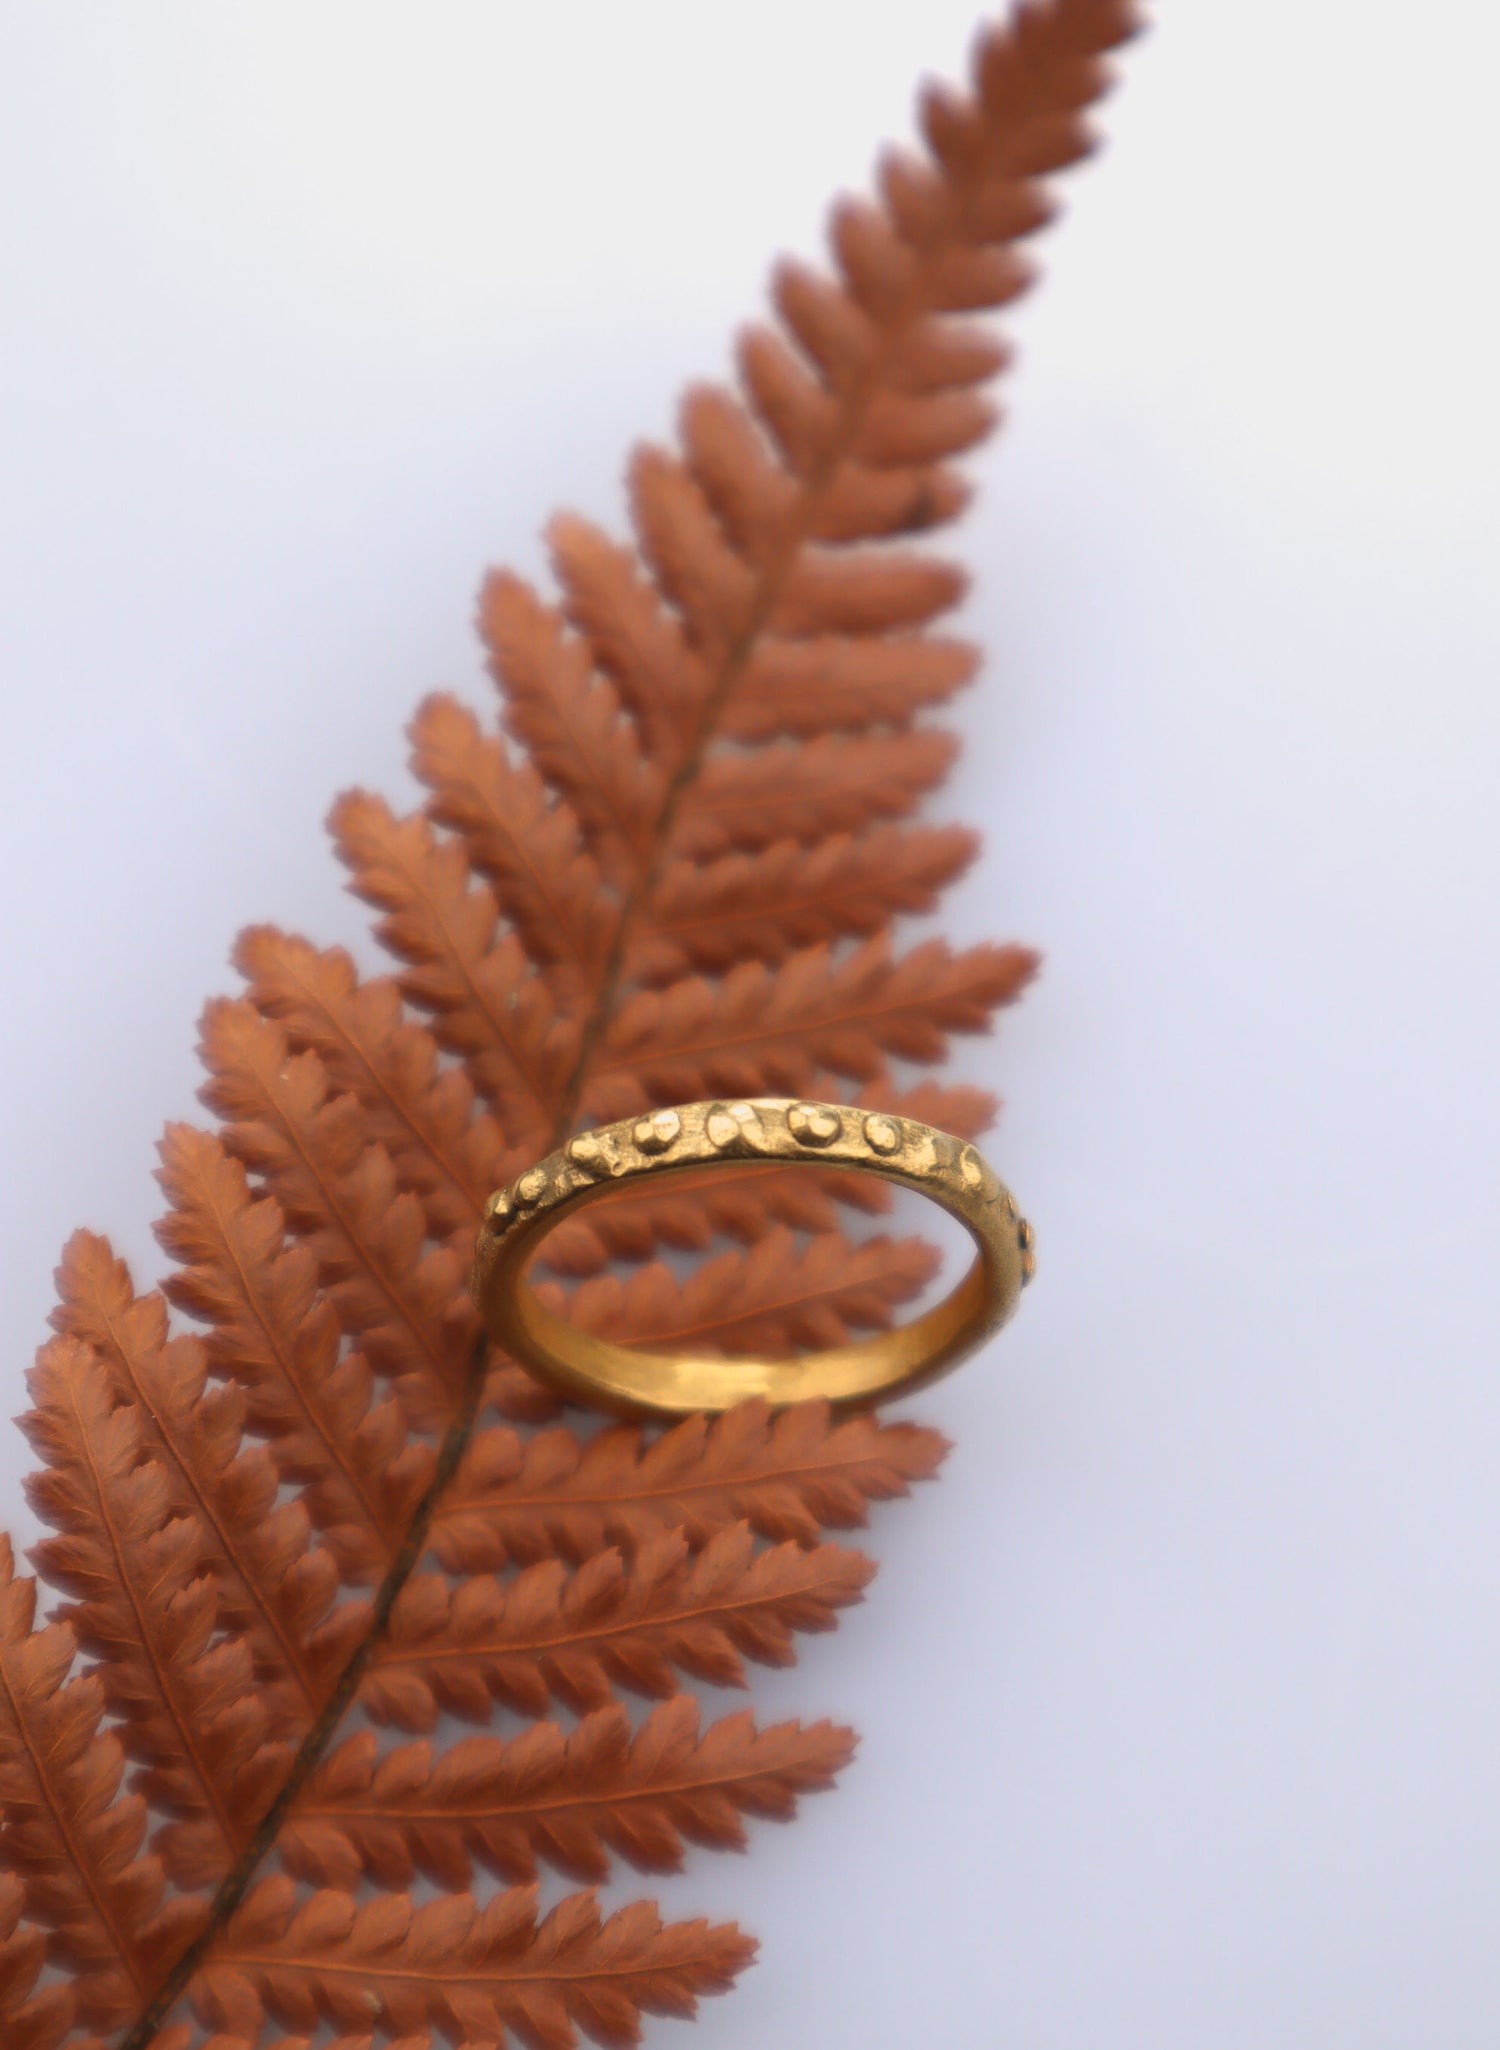 Fluid Stacking Ring + 18ct gold